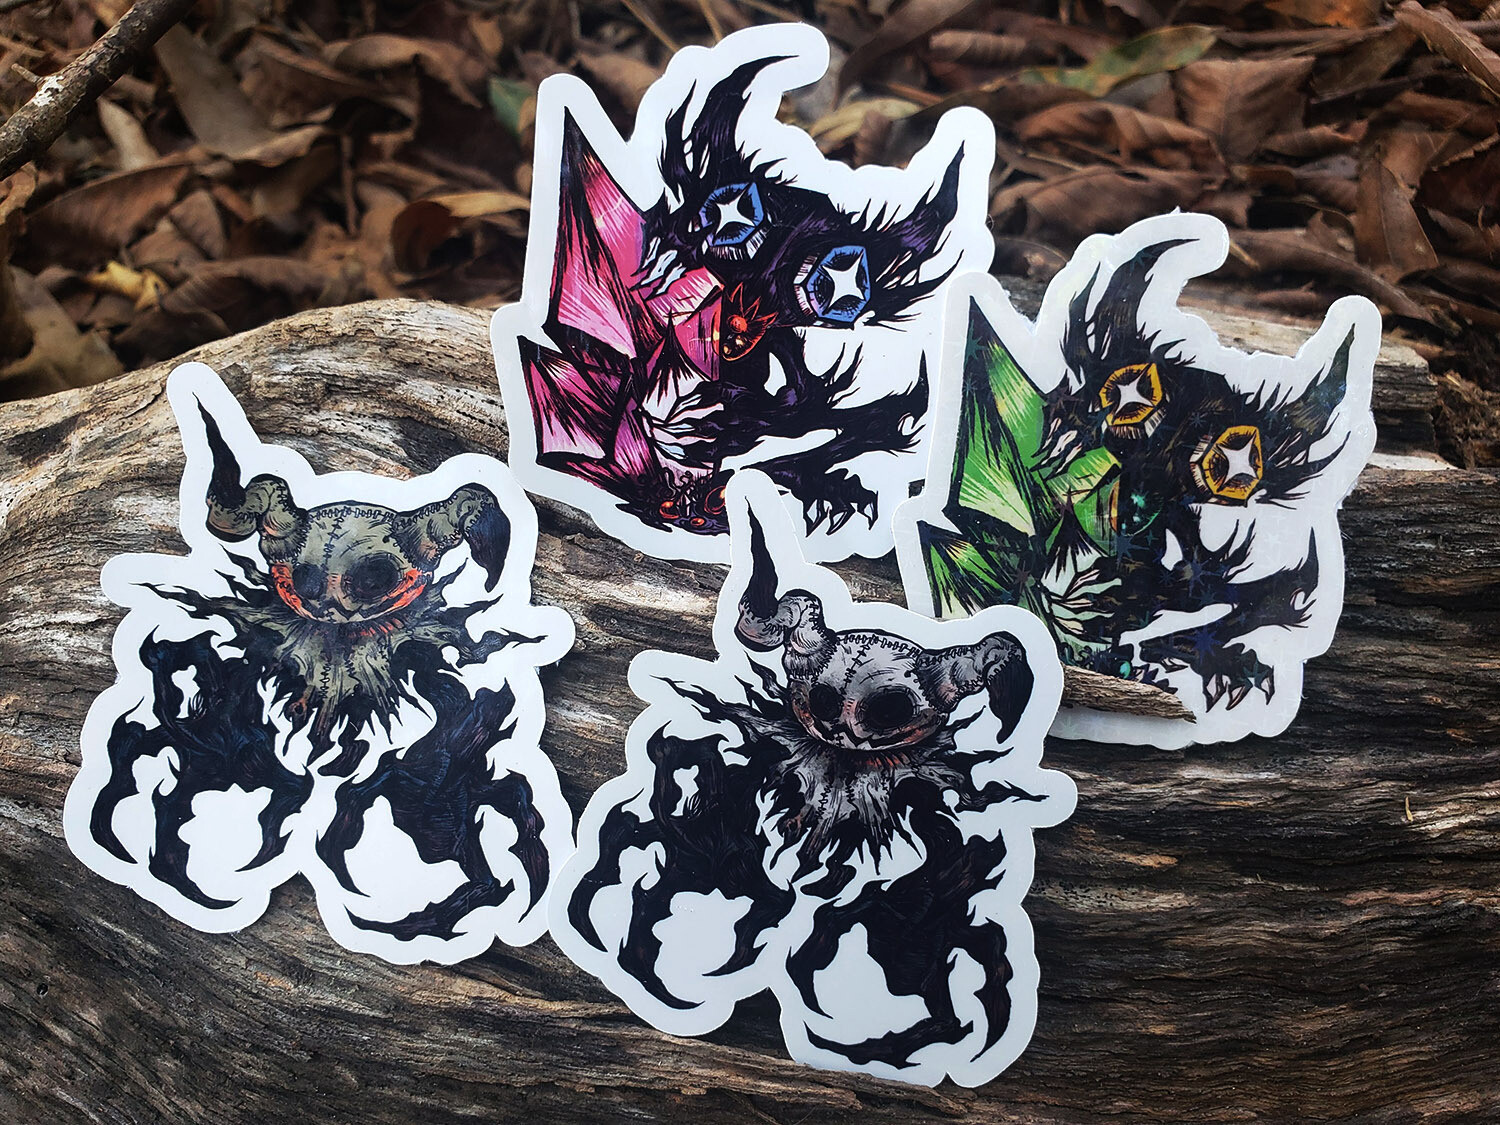 Goblin and Mimic stickers